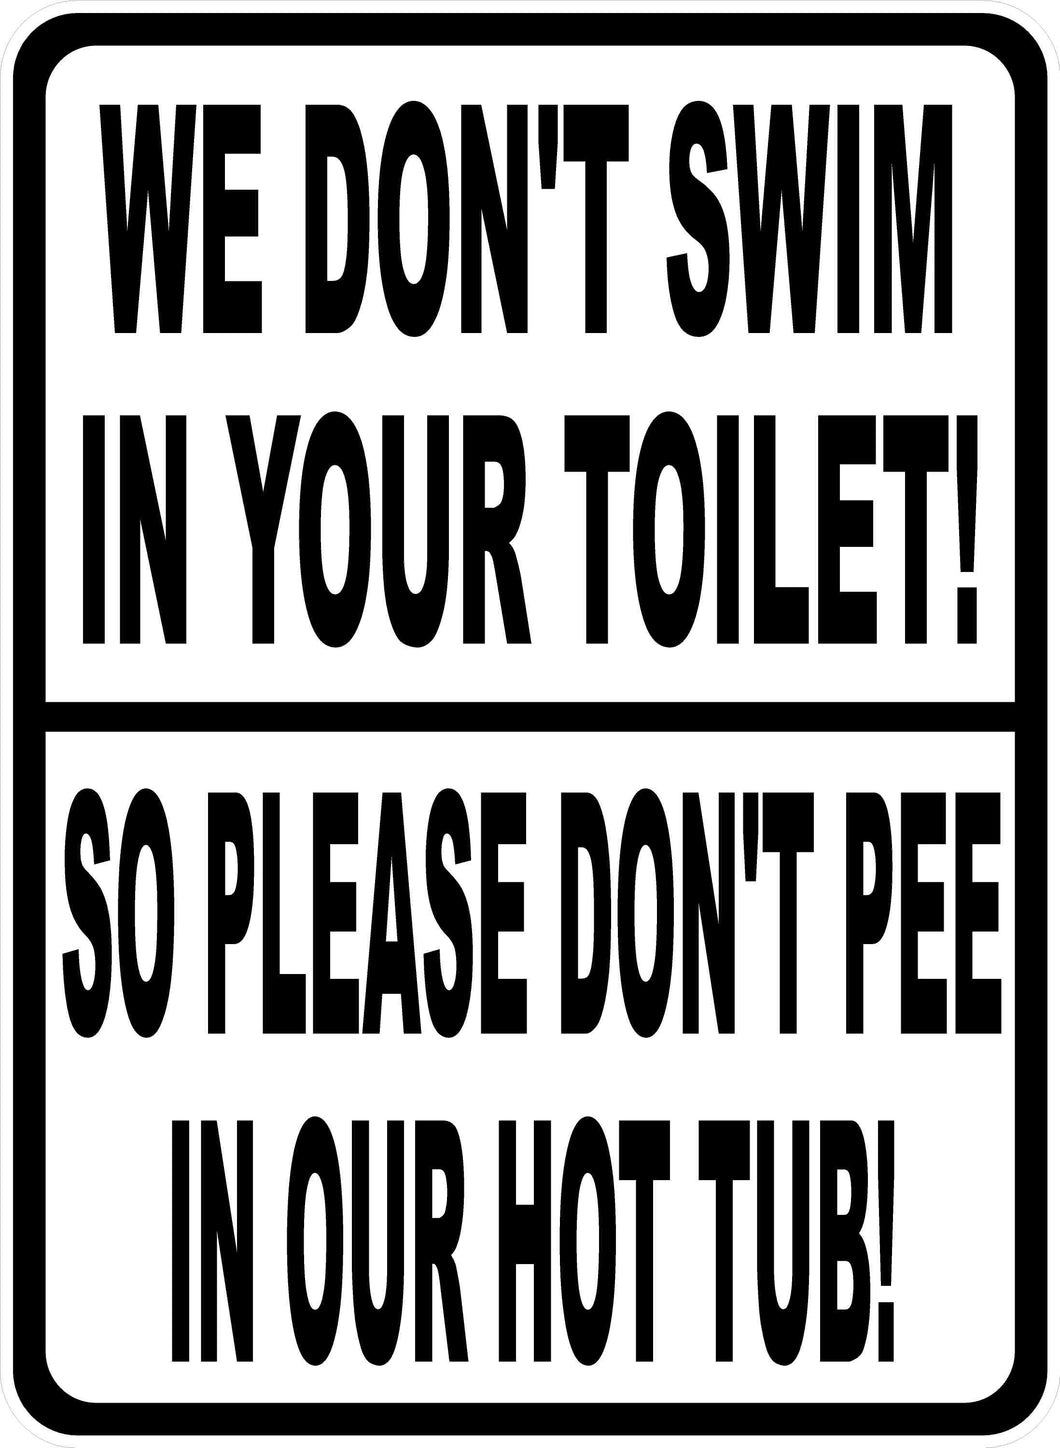 We Don't Swim in Toilet Don't Pee in Hot Tub Sign